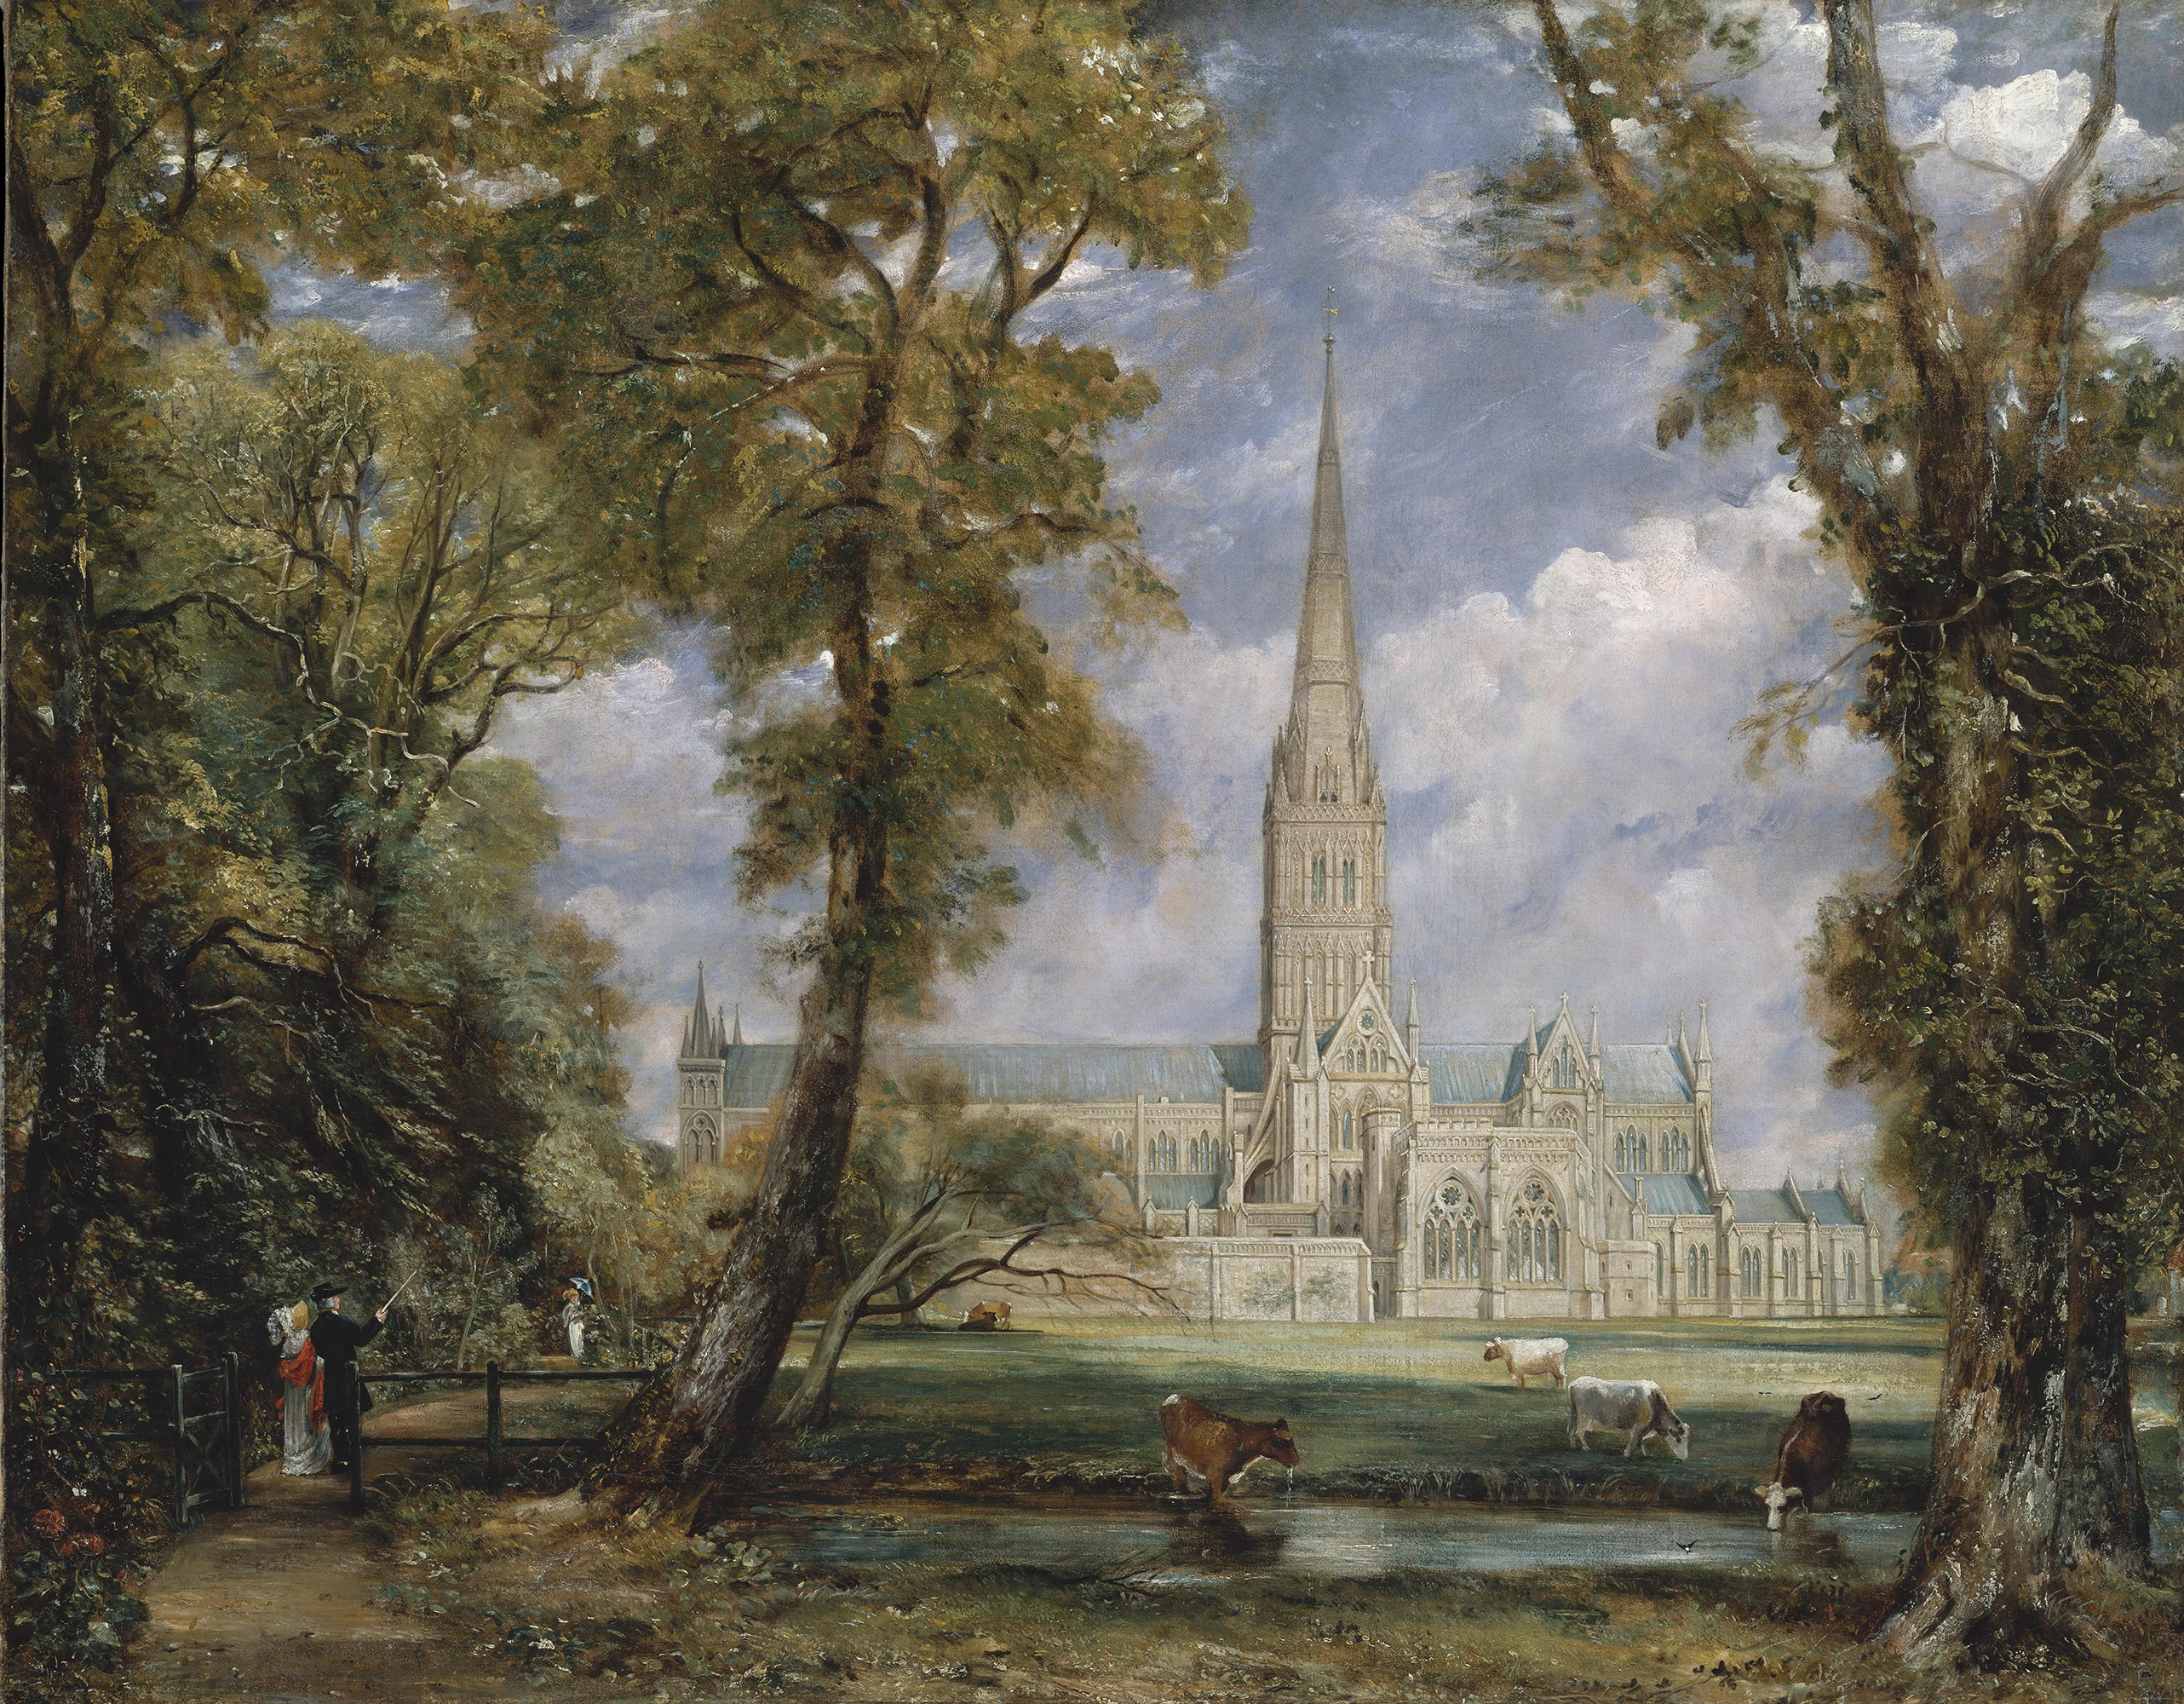 Salisbury Cathedral from the Bishop's Grounds, John Constable